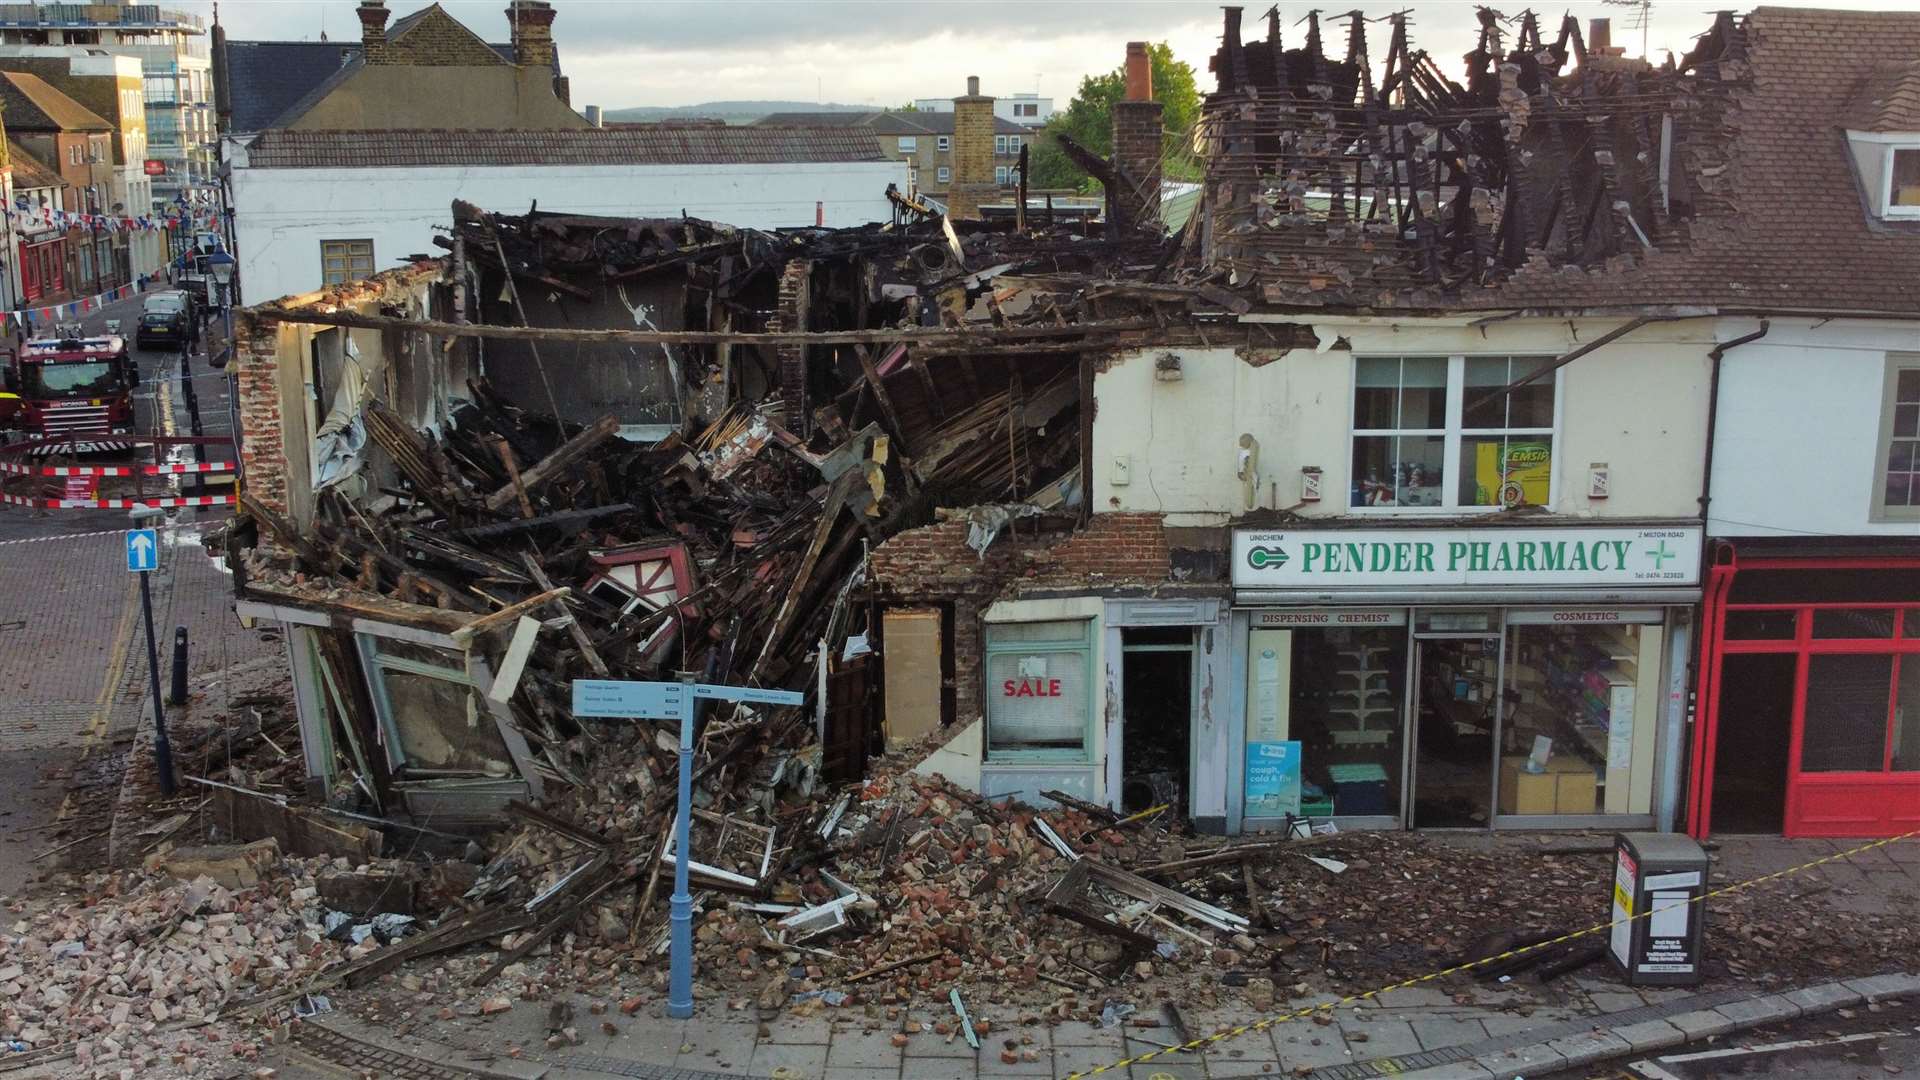 There is damage to the pharmacy next door